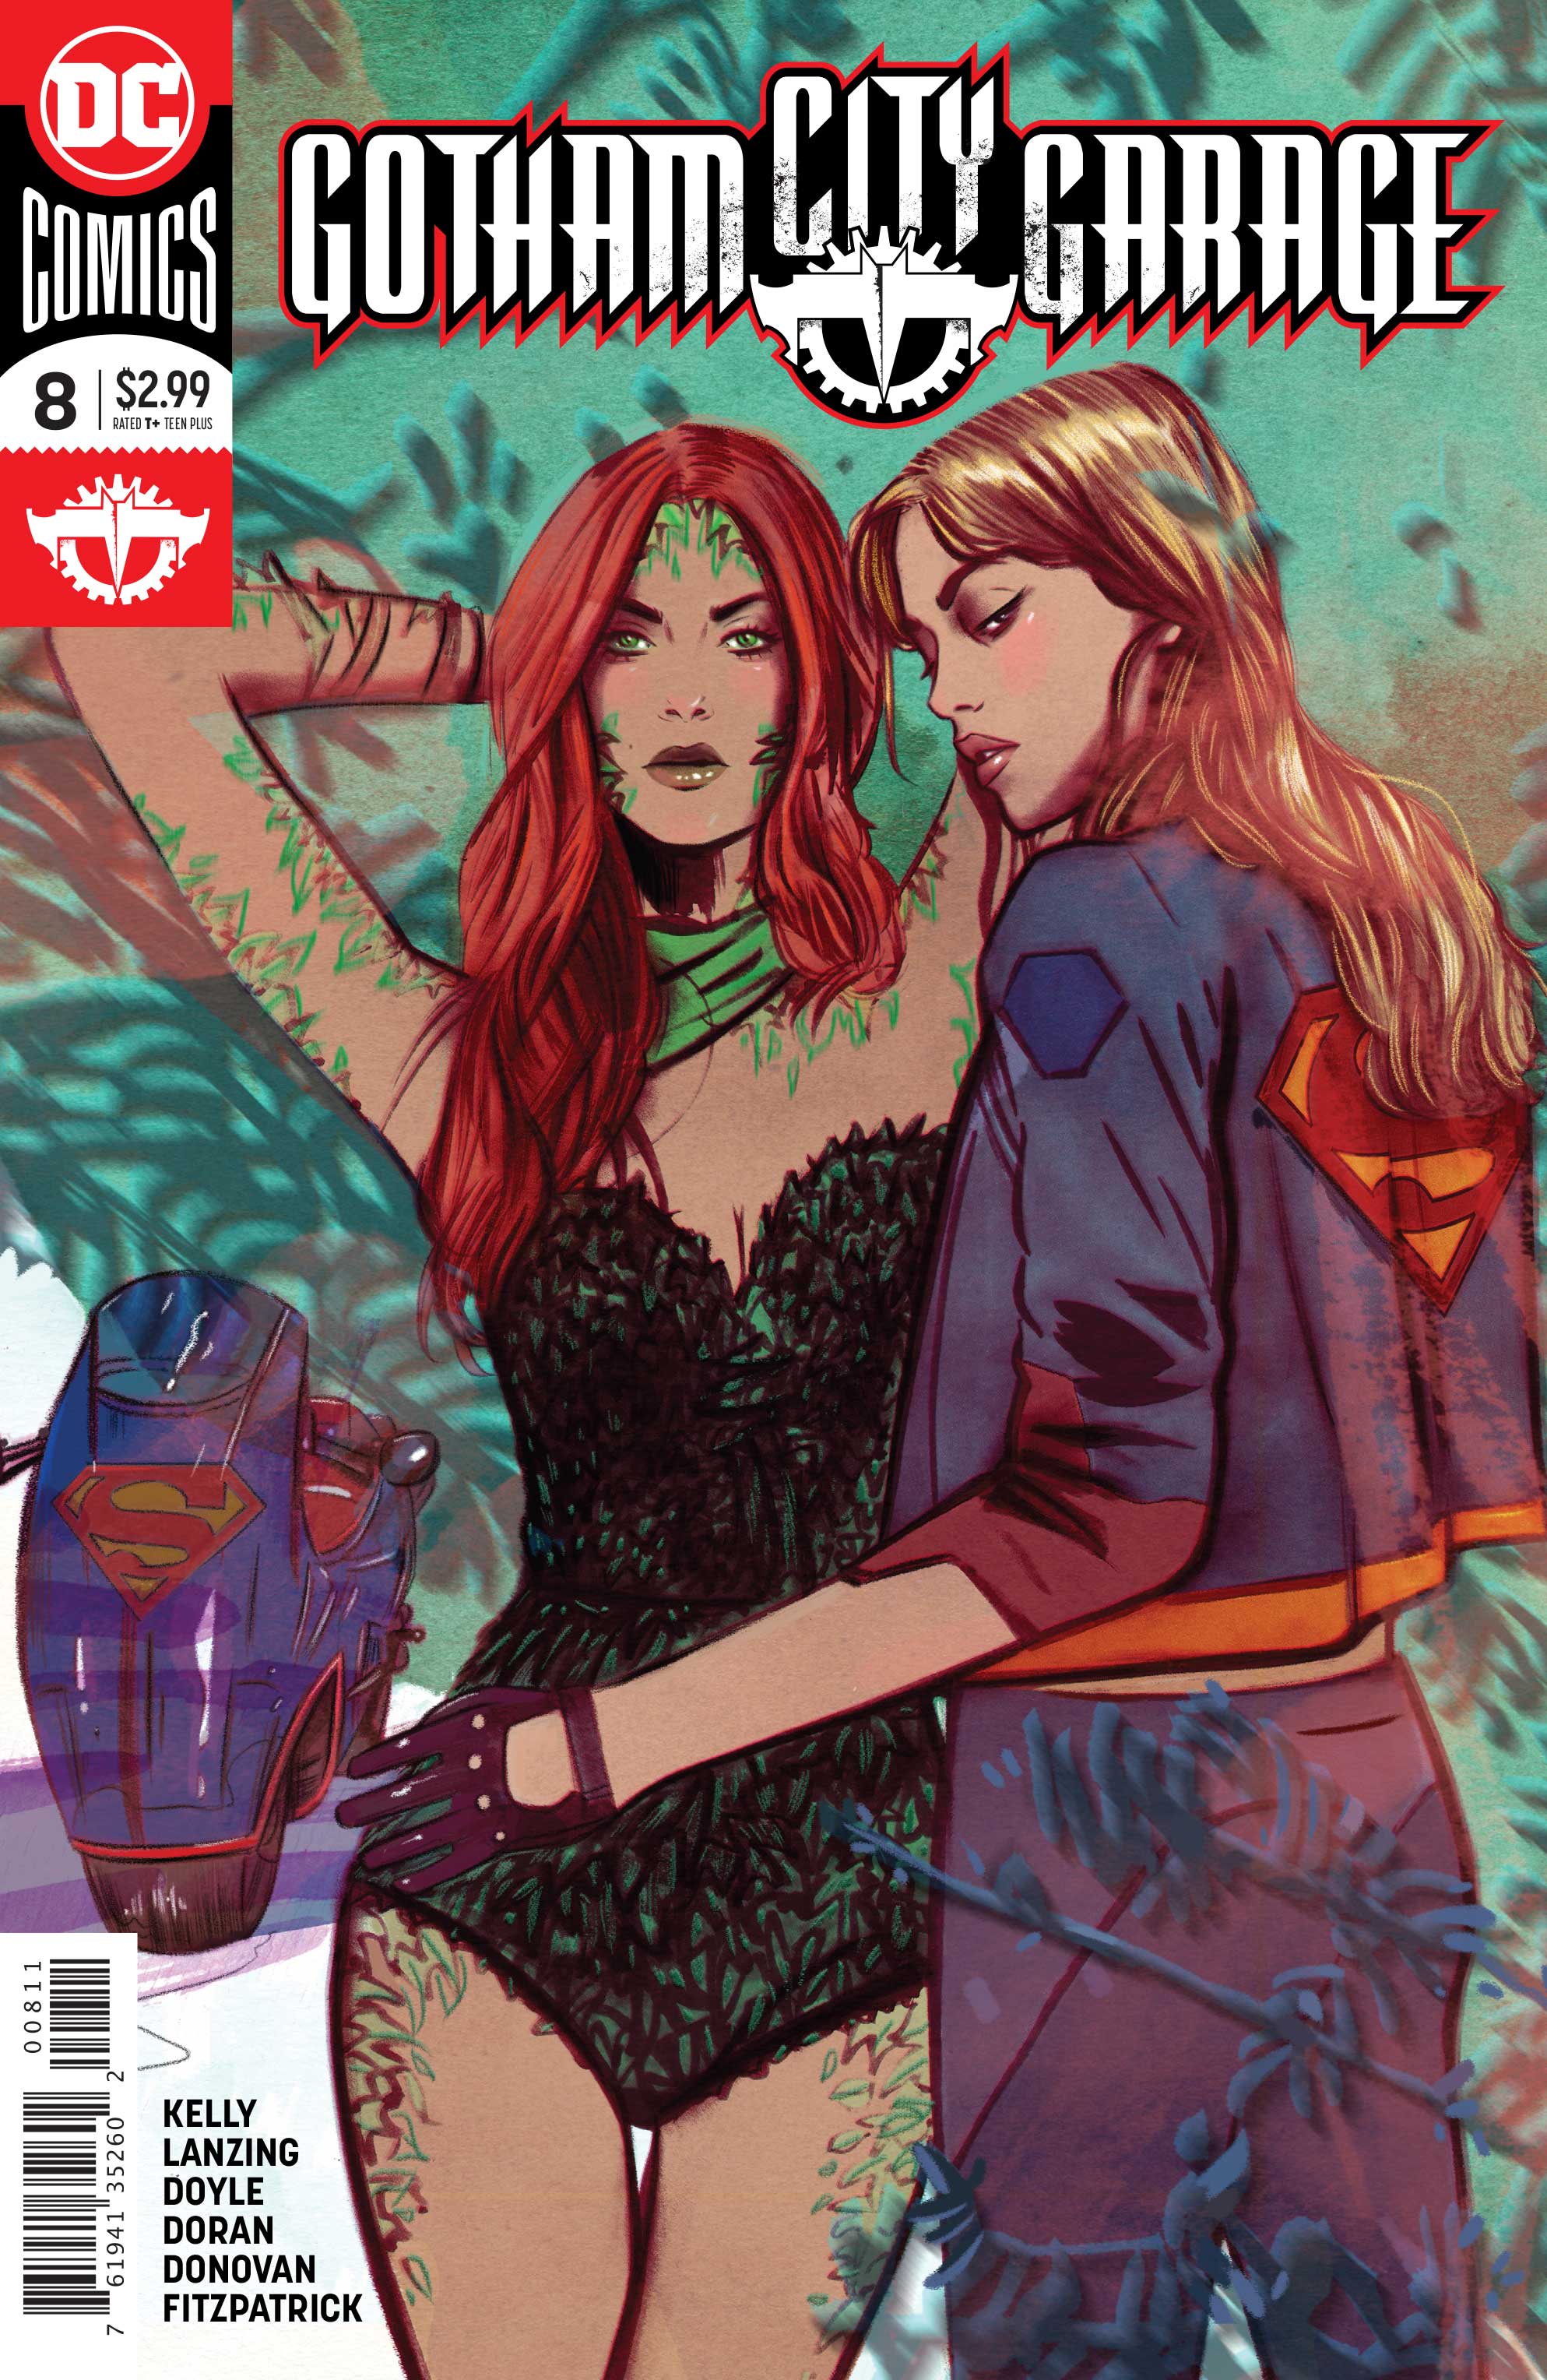 Comic Art Showcase: Issue #8 – Scarlet Witch, The Speech Bubble